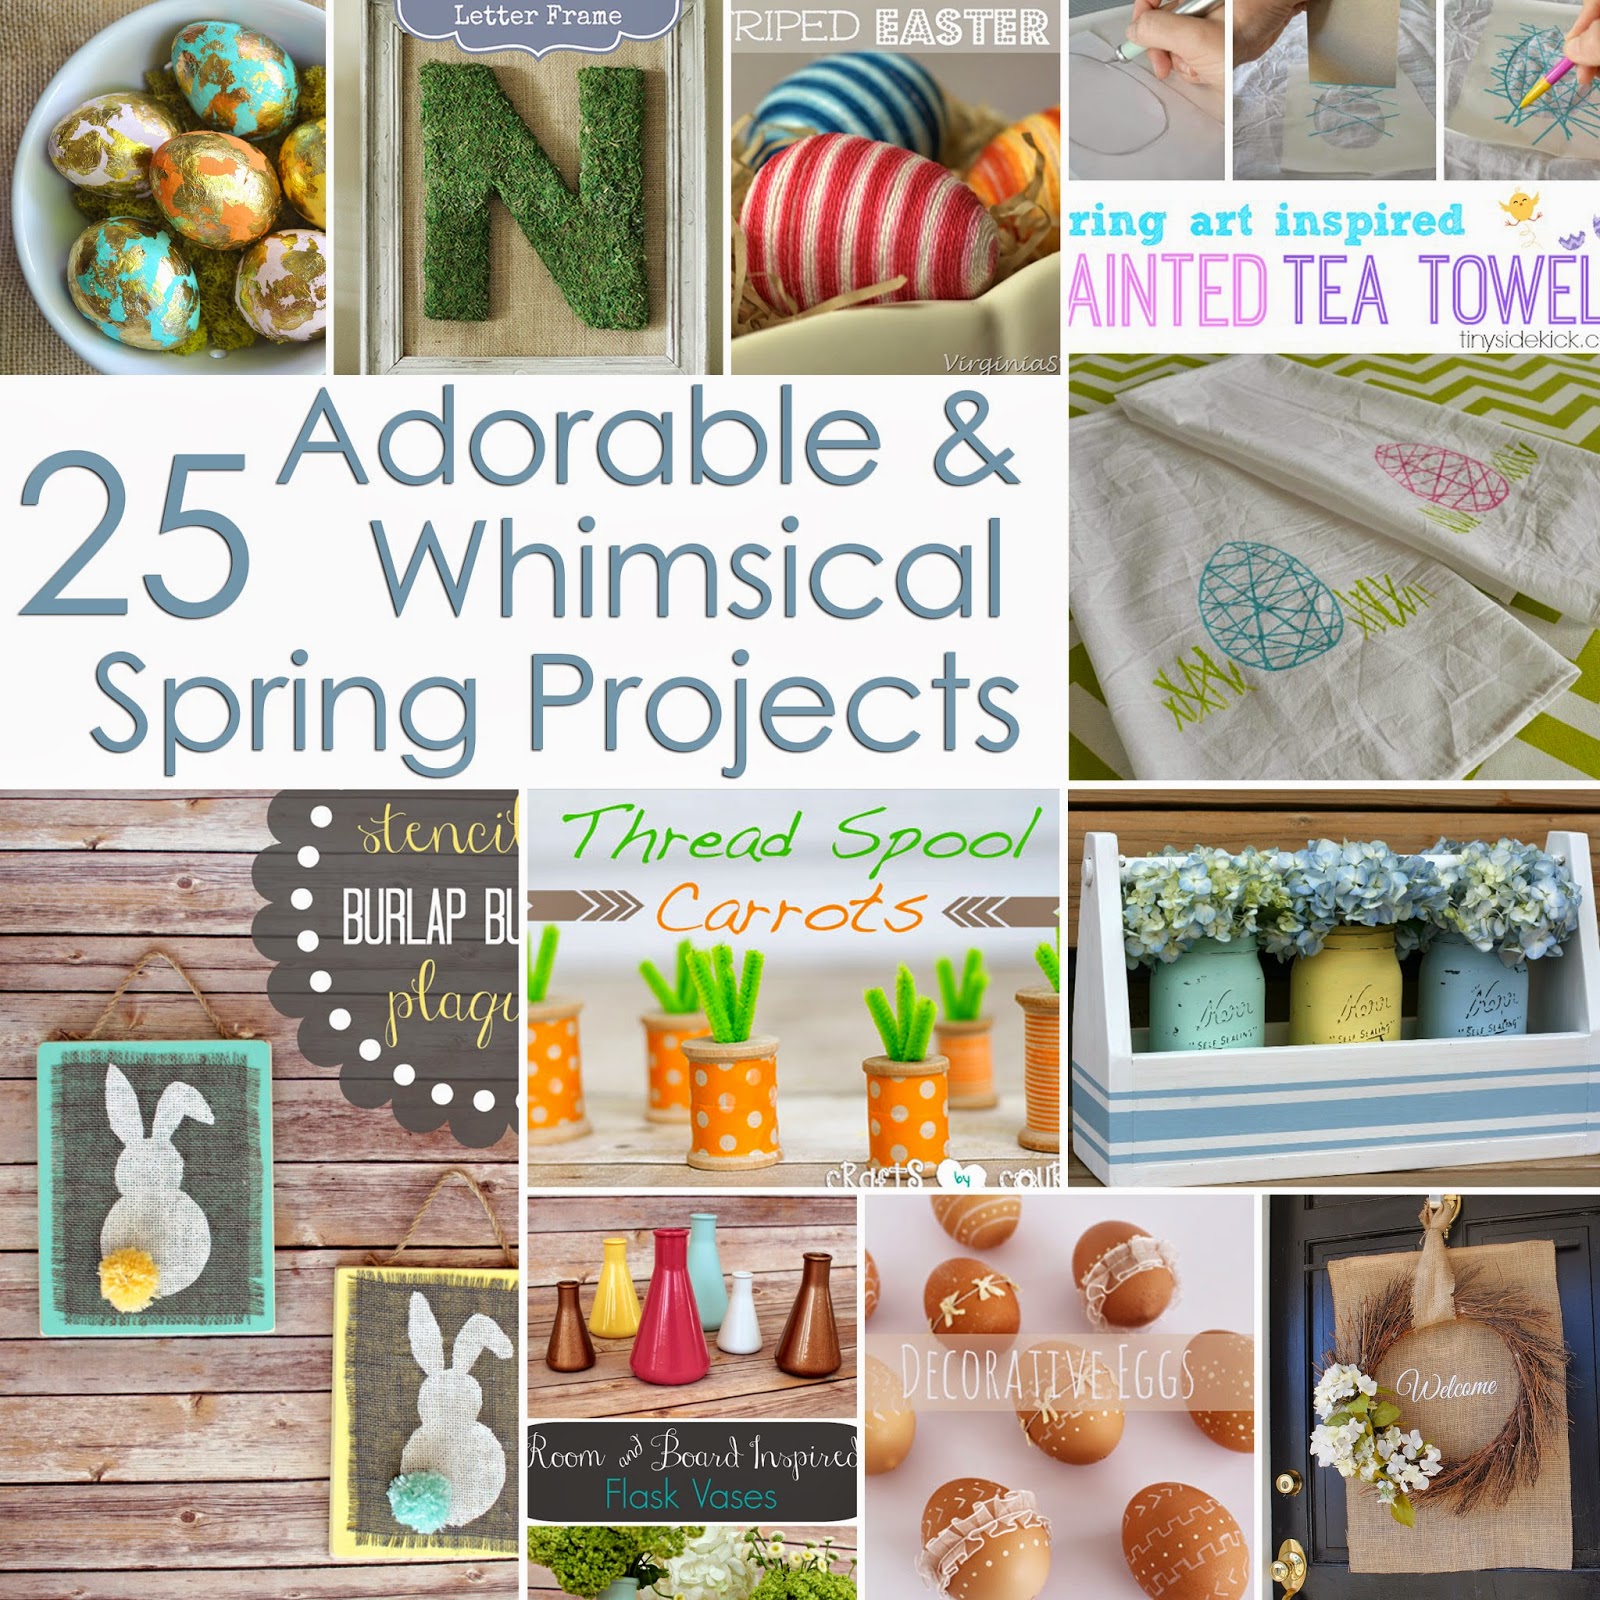 25 Adorable Spring Projects